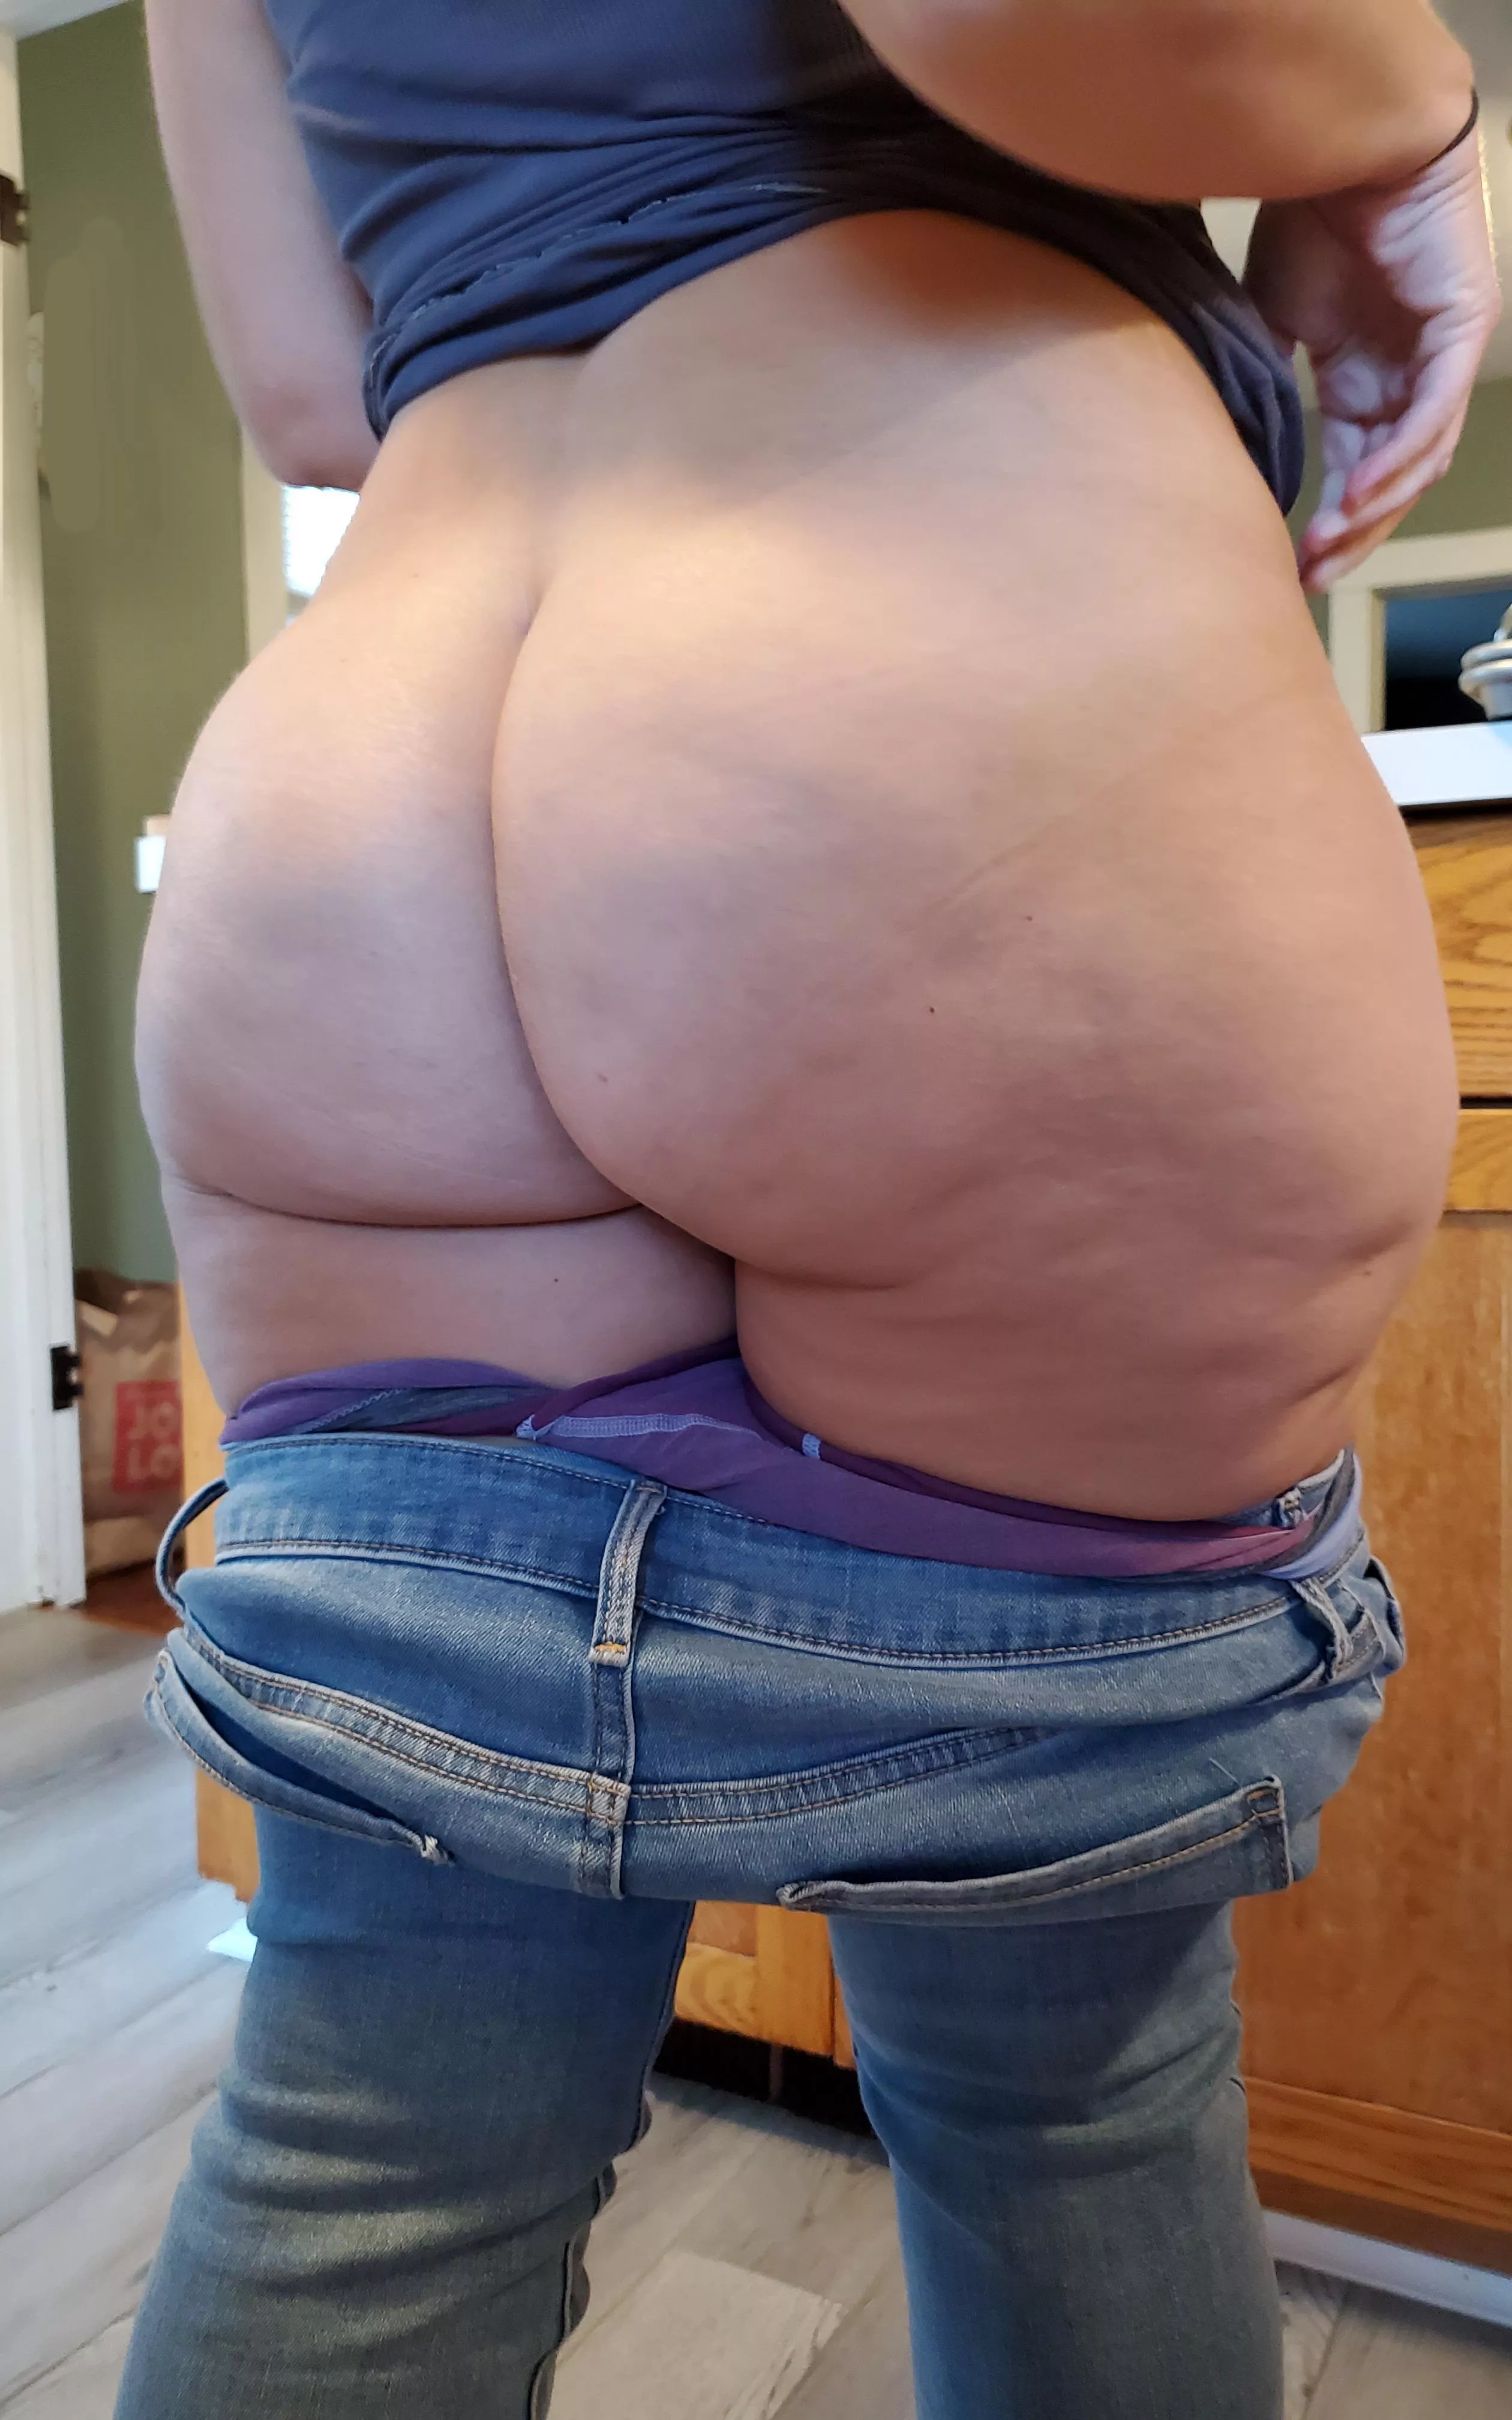 Would you fuck my chubby butt?? nudes : chubby | NUDE-PICS.ORG